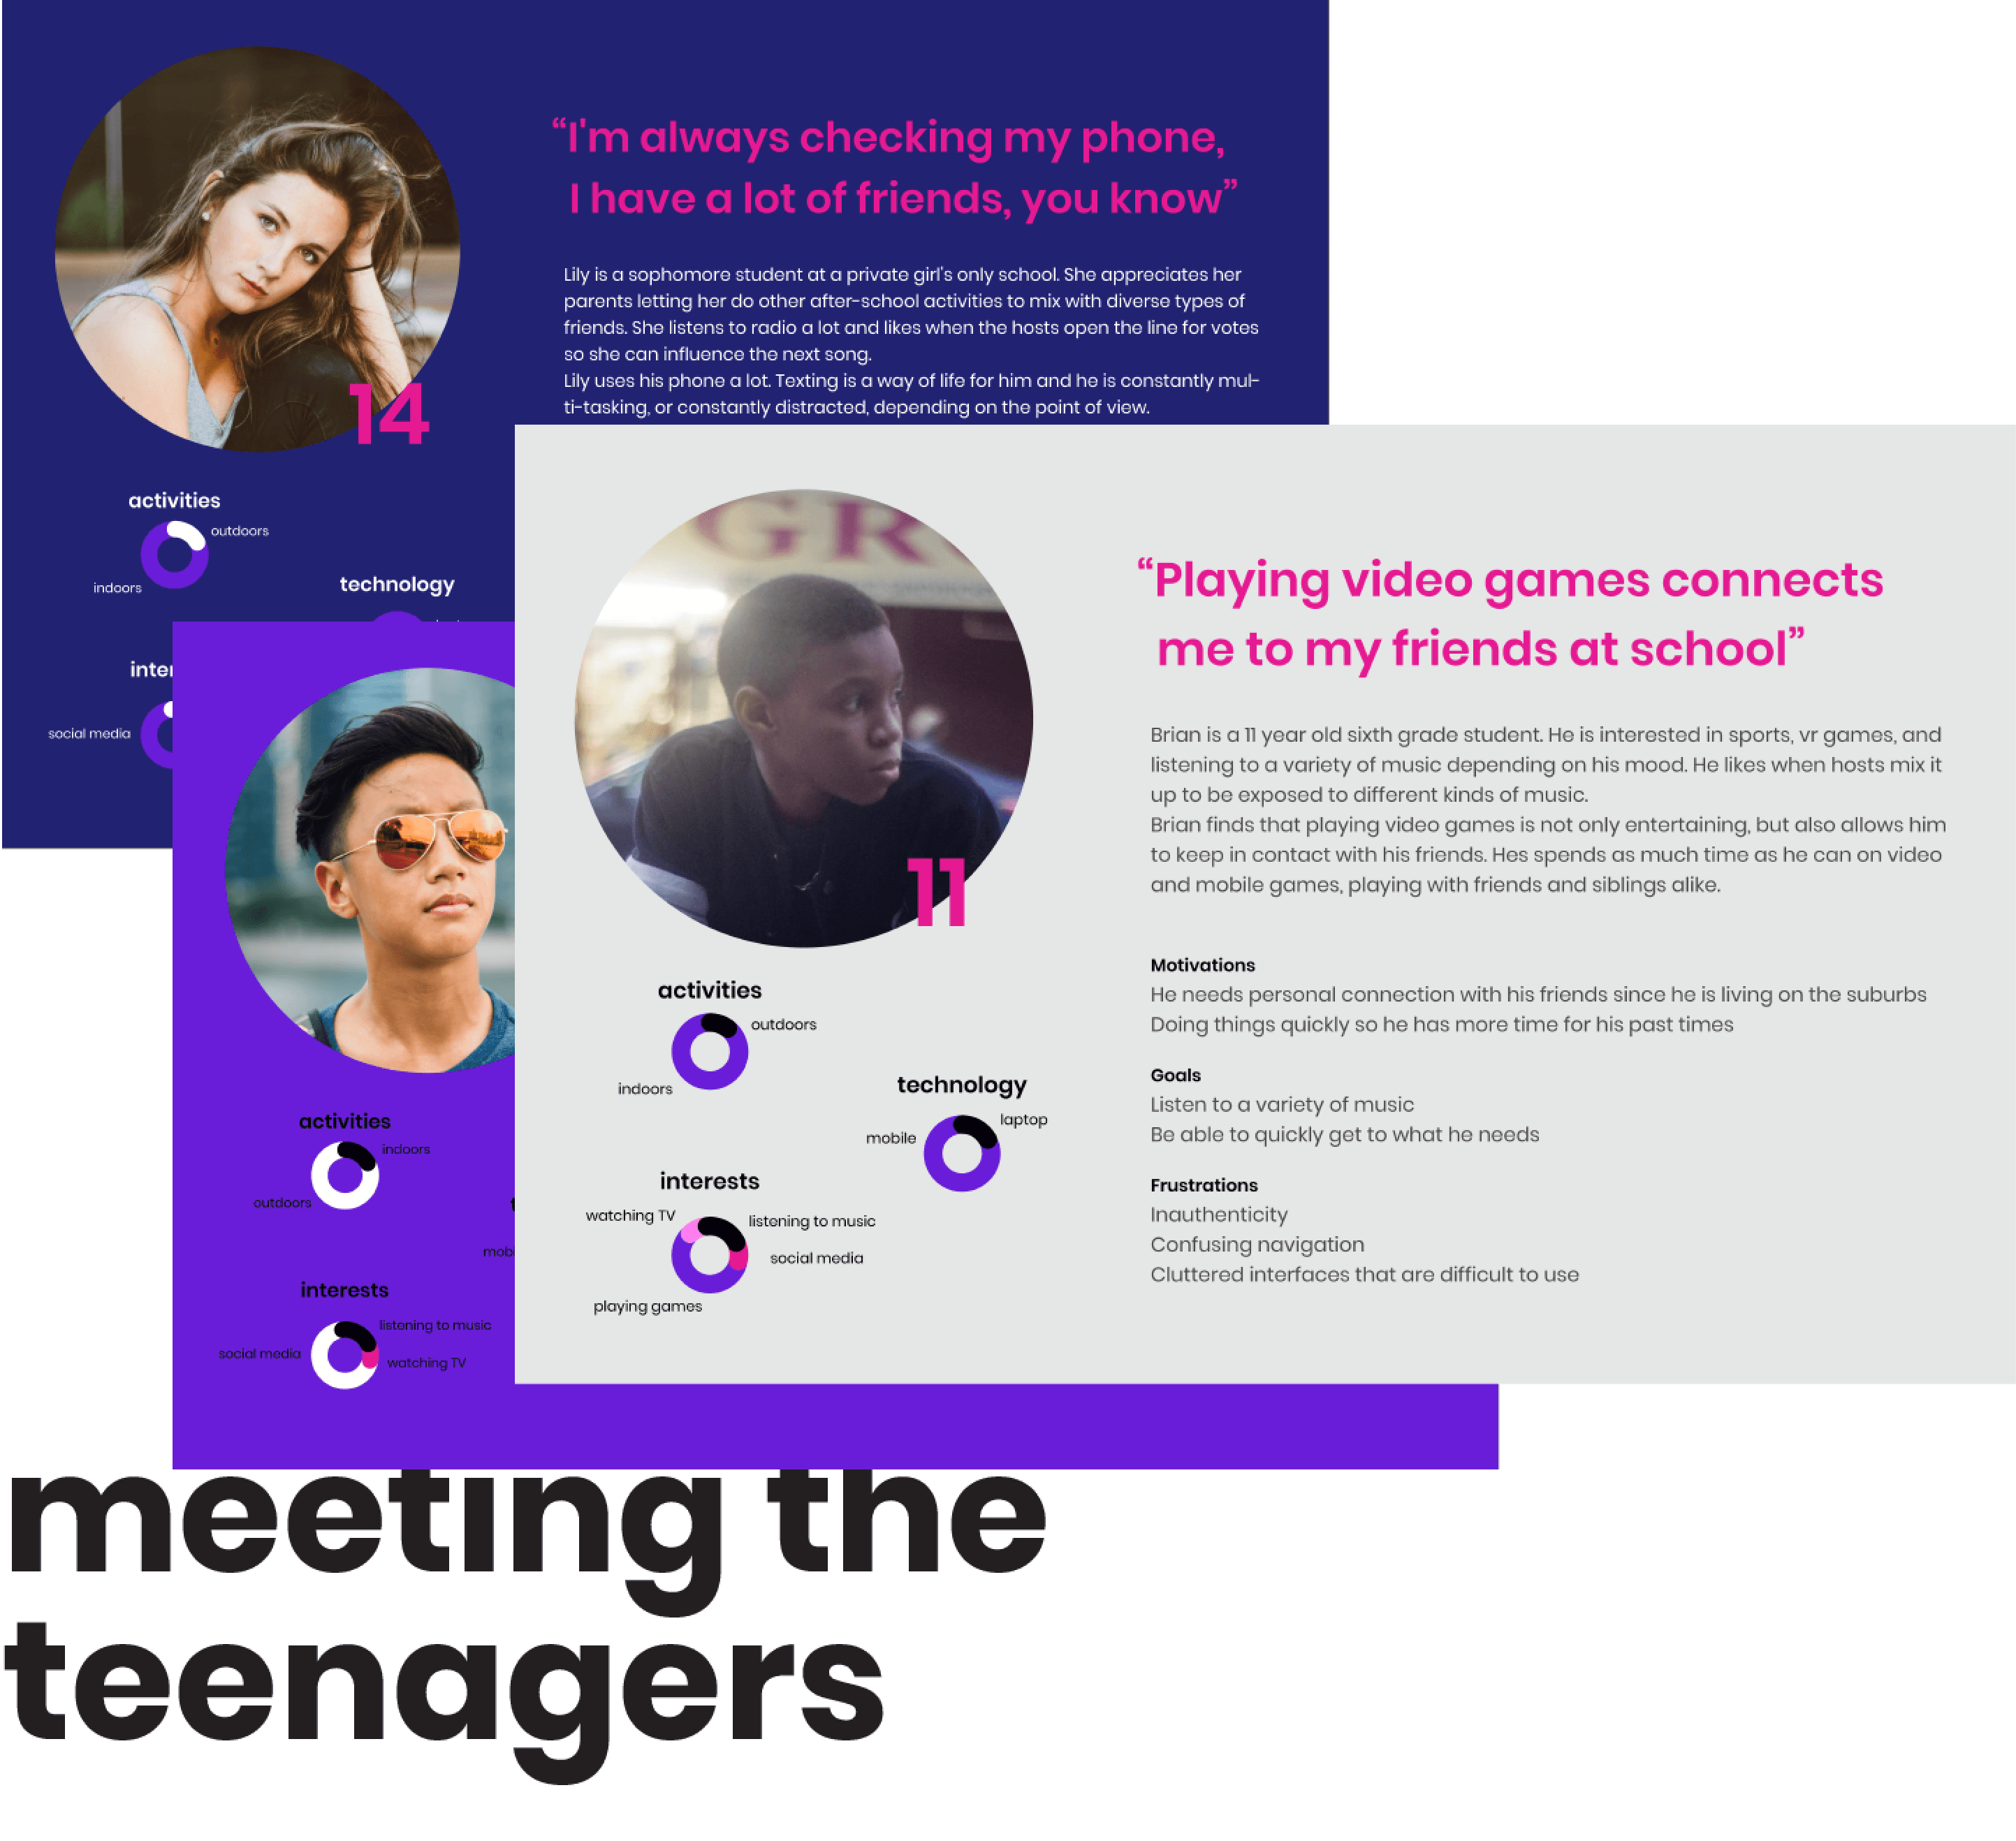 Teenager user personas, with breakdown of their needs, activities, use of technology, and interests